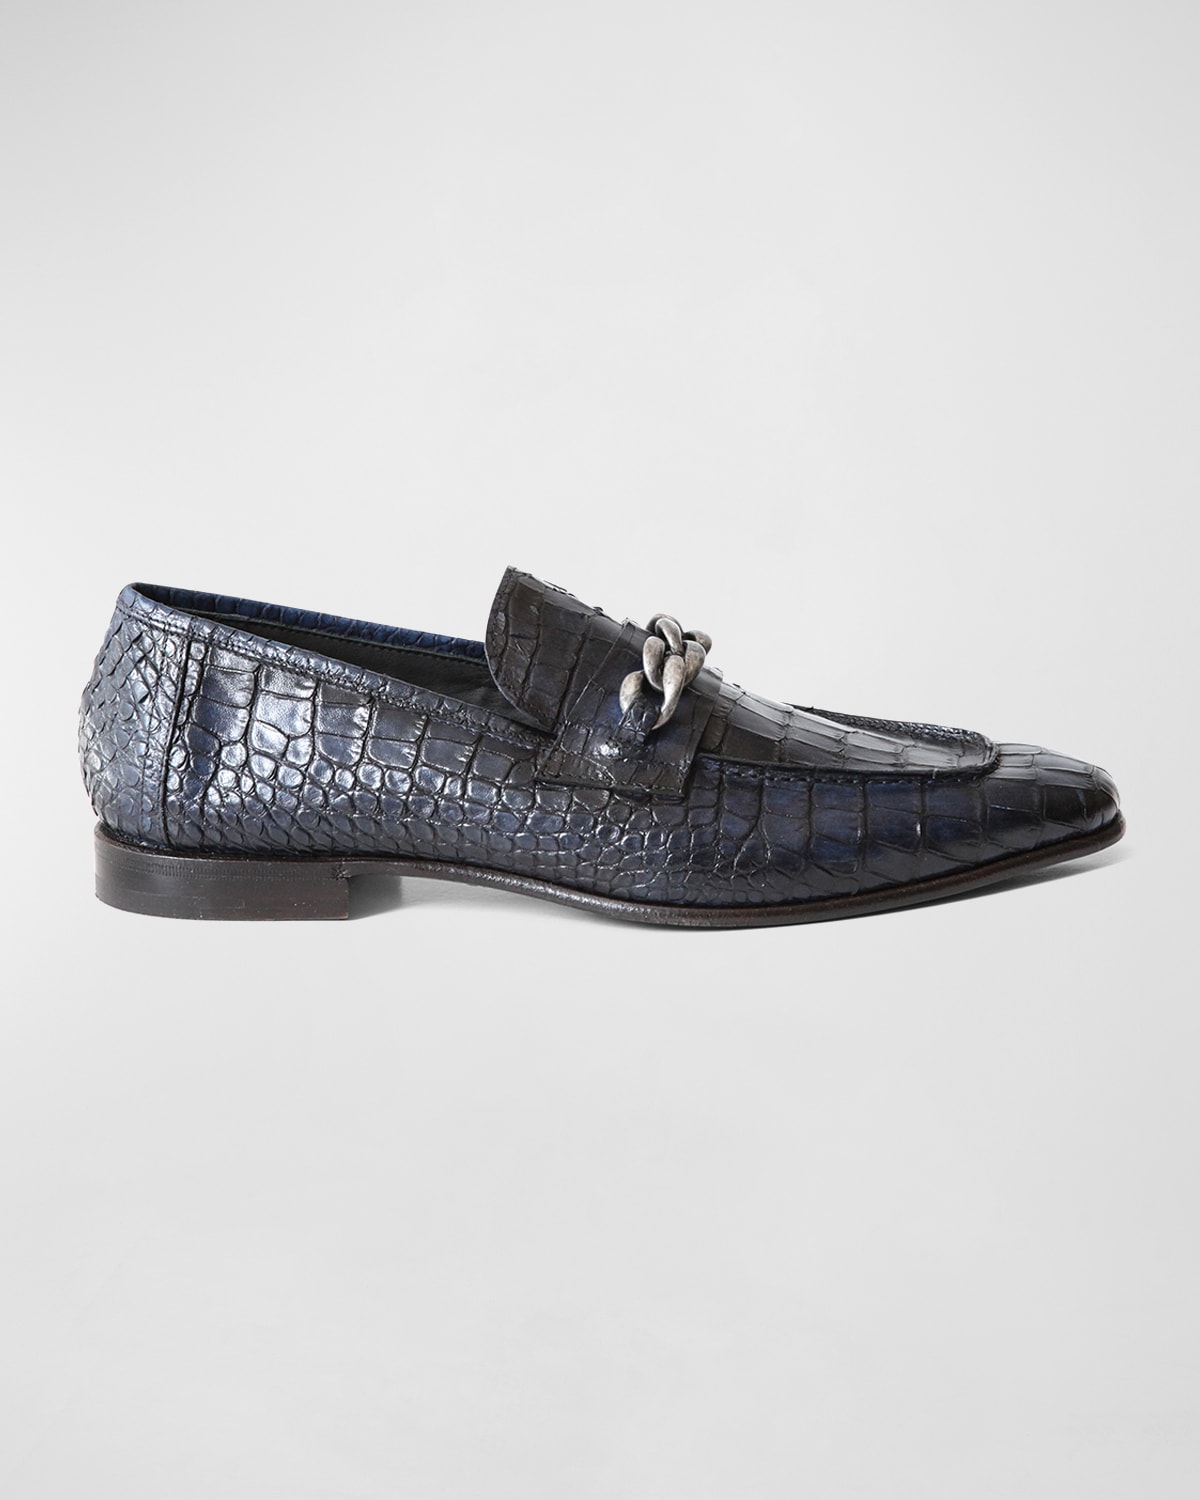 Jo Ghost Men's Croc-Printed Leather Chain Loafers